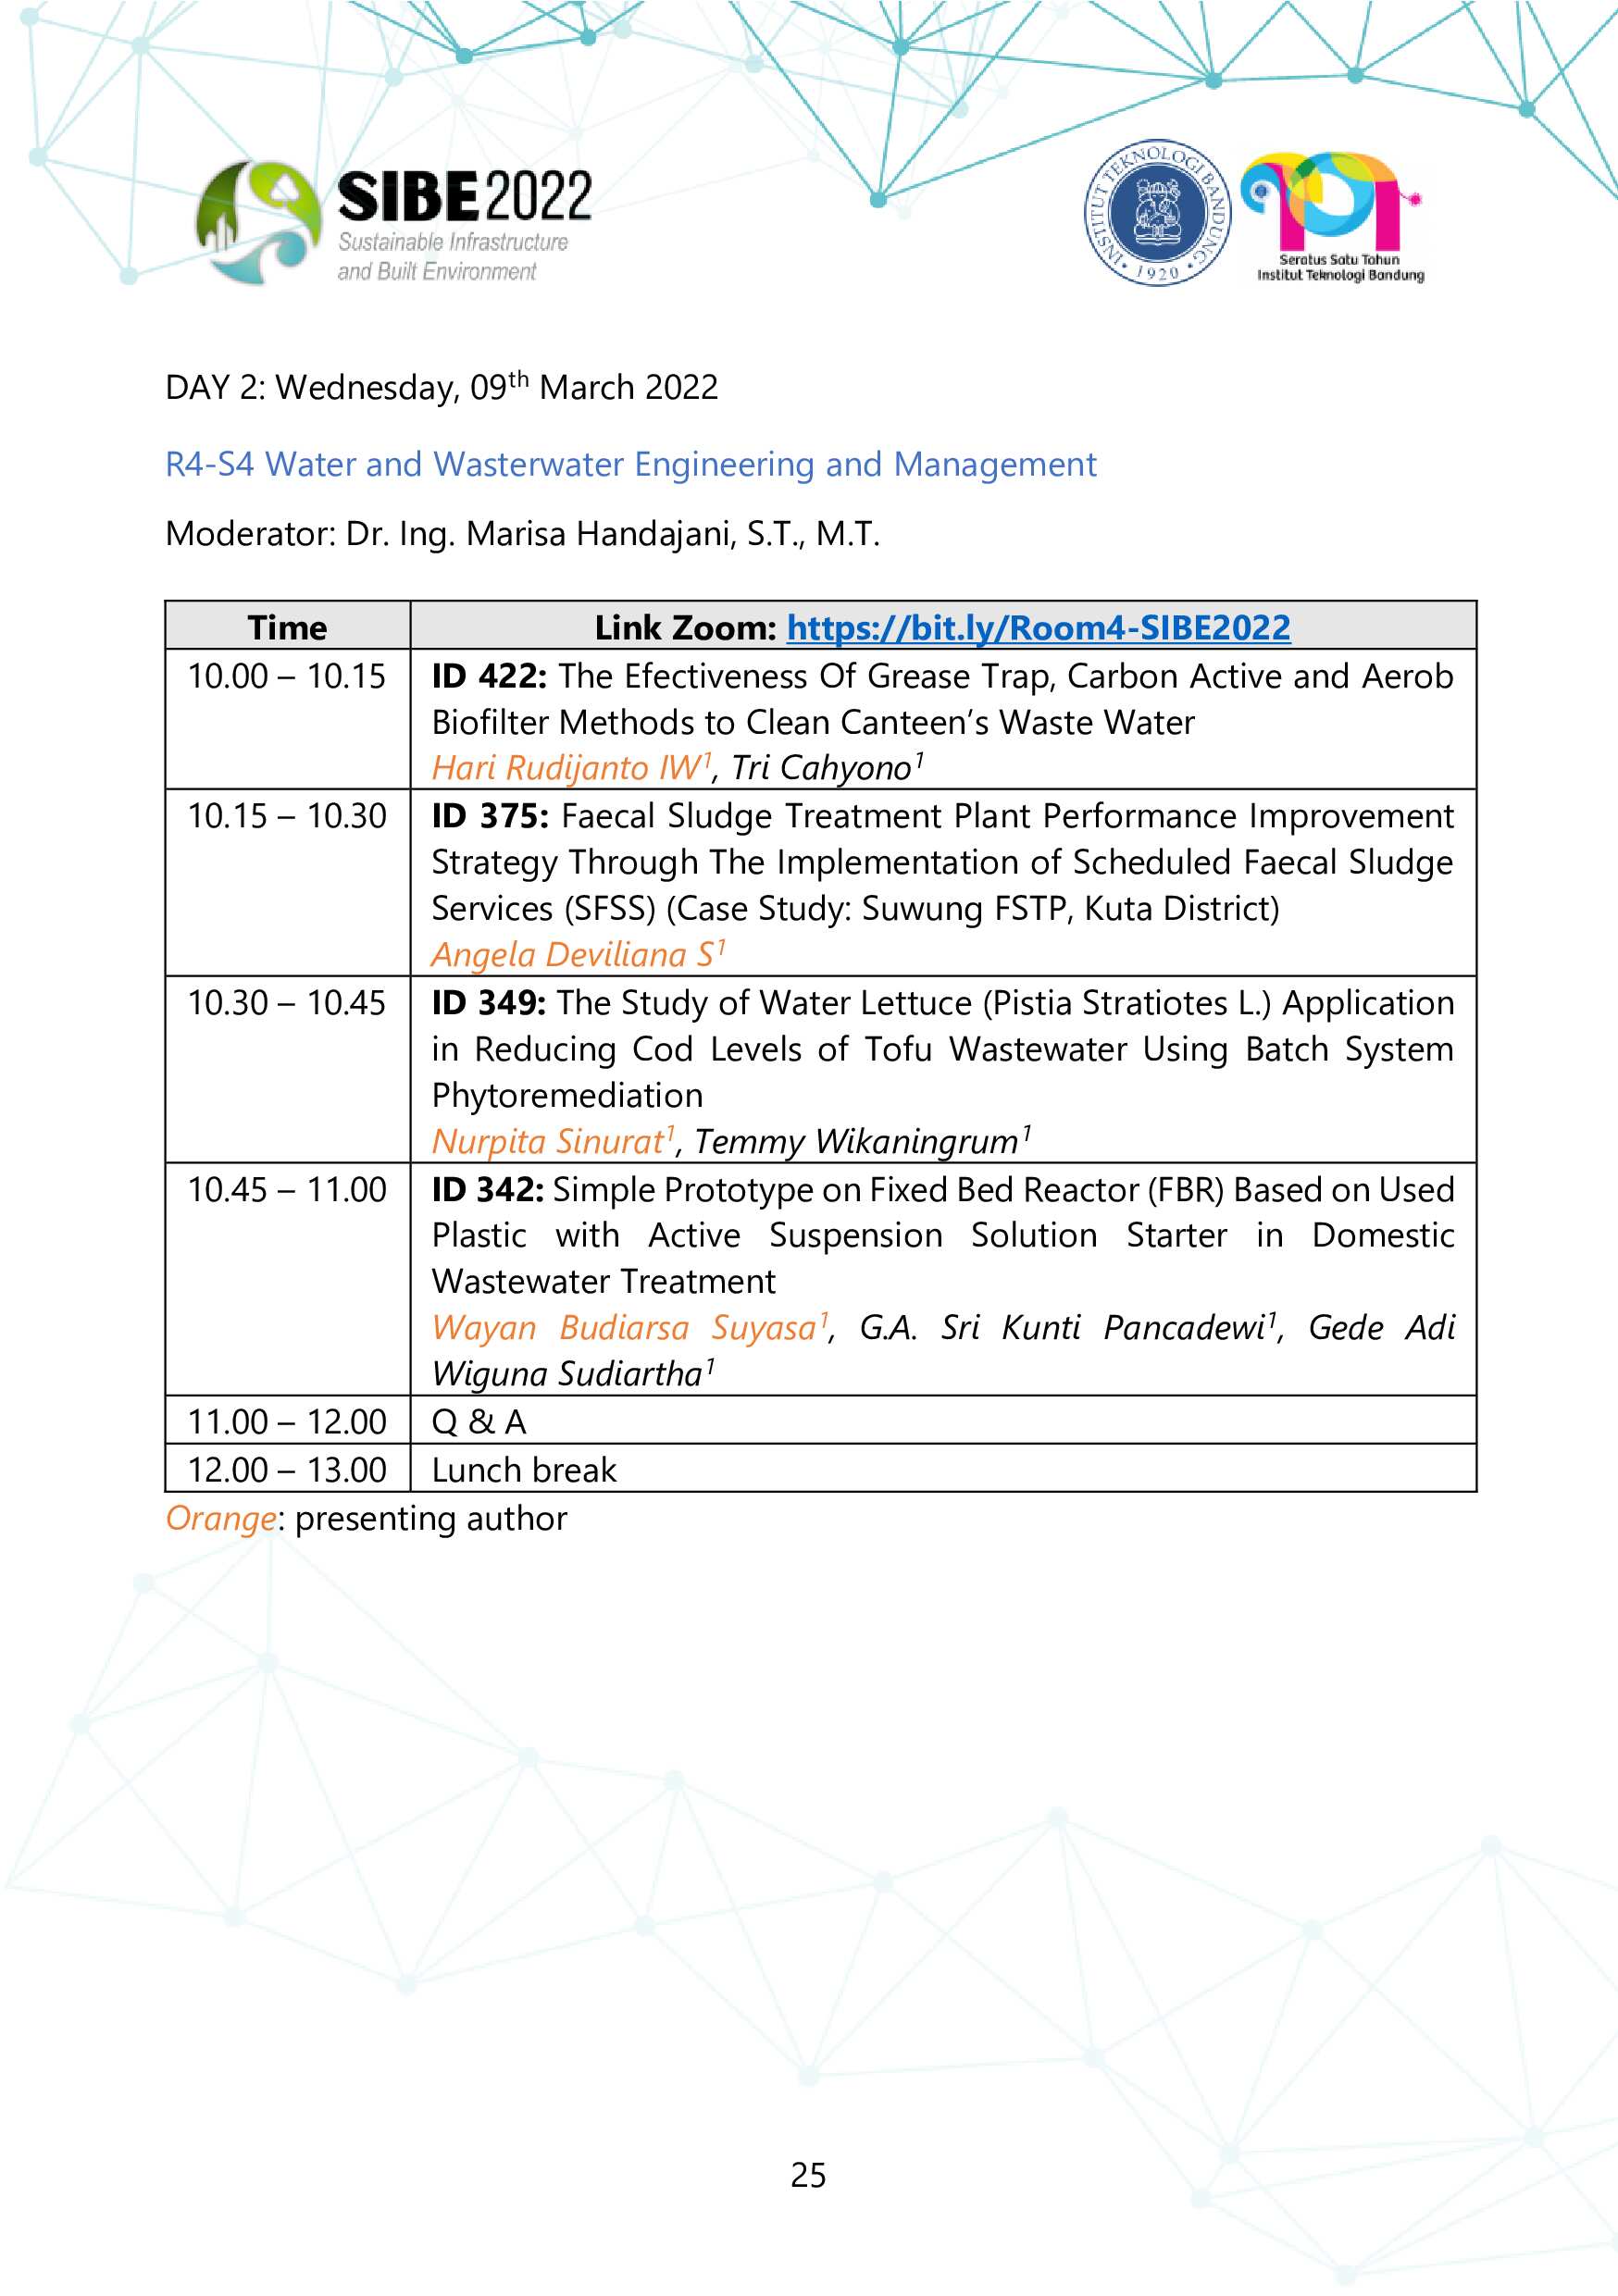 SIBE 2022 Program Schedule 8-9 March 2022-24